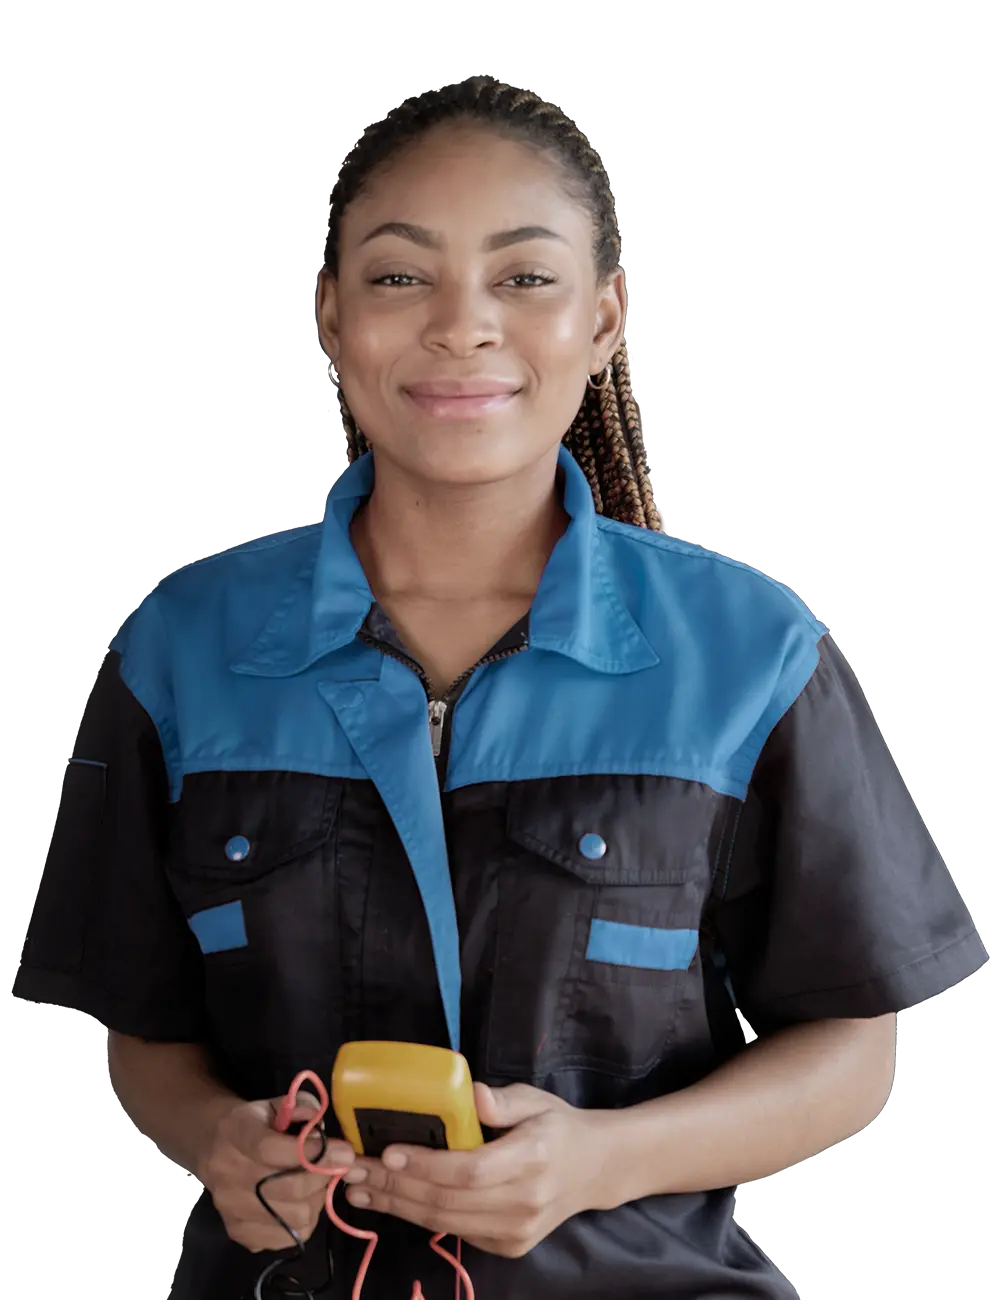 A woman wearing mechanic coveralls smiles and looks forward